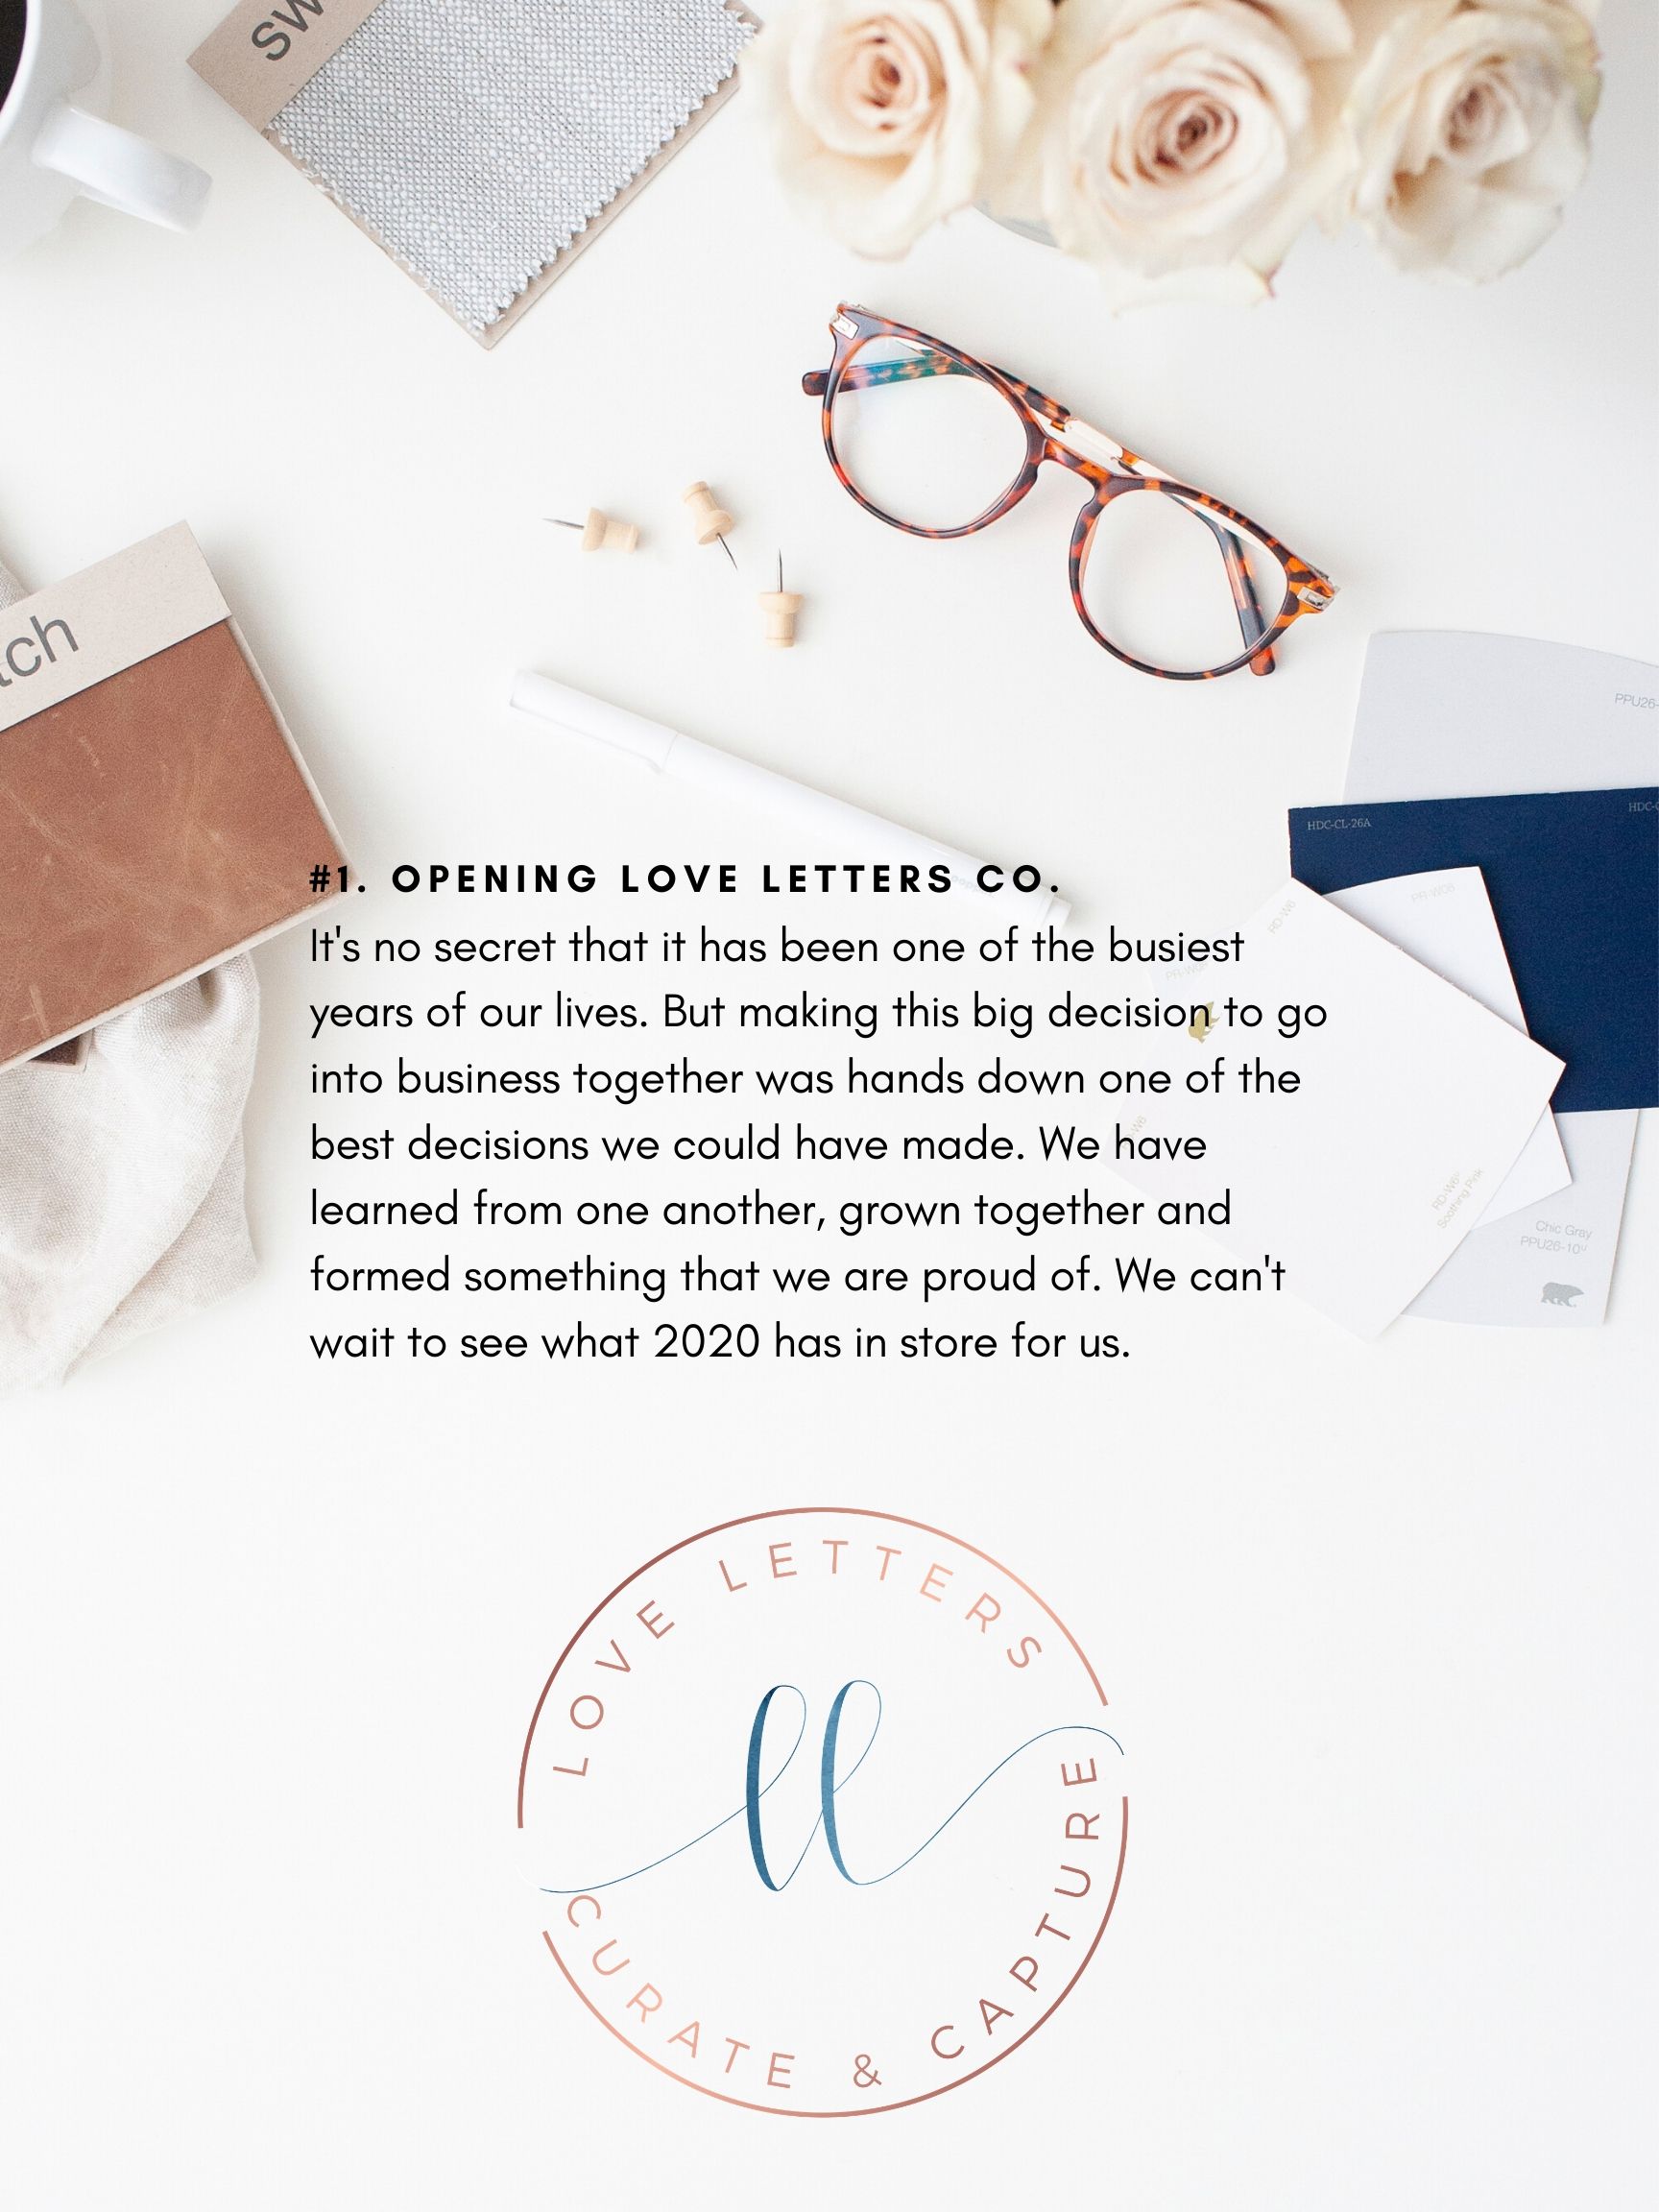 19 Highlights of 2019-Love Letters Co. 